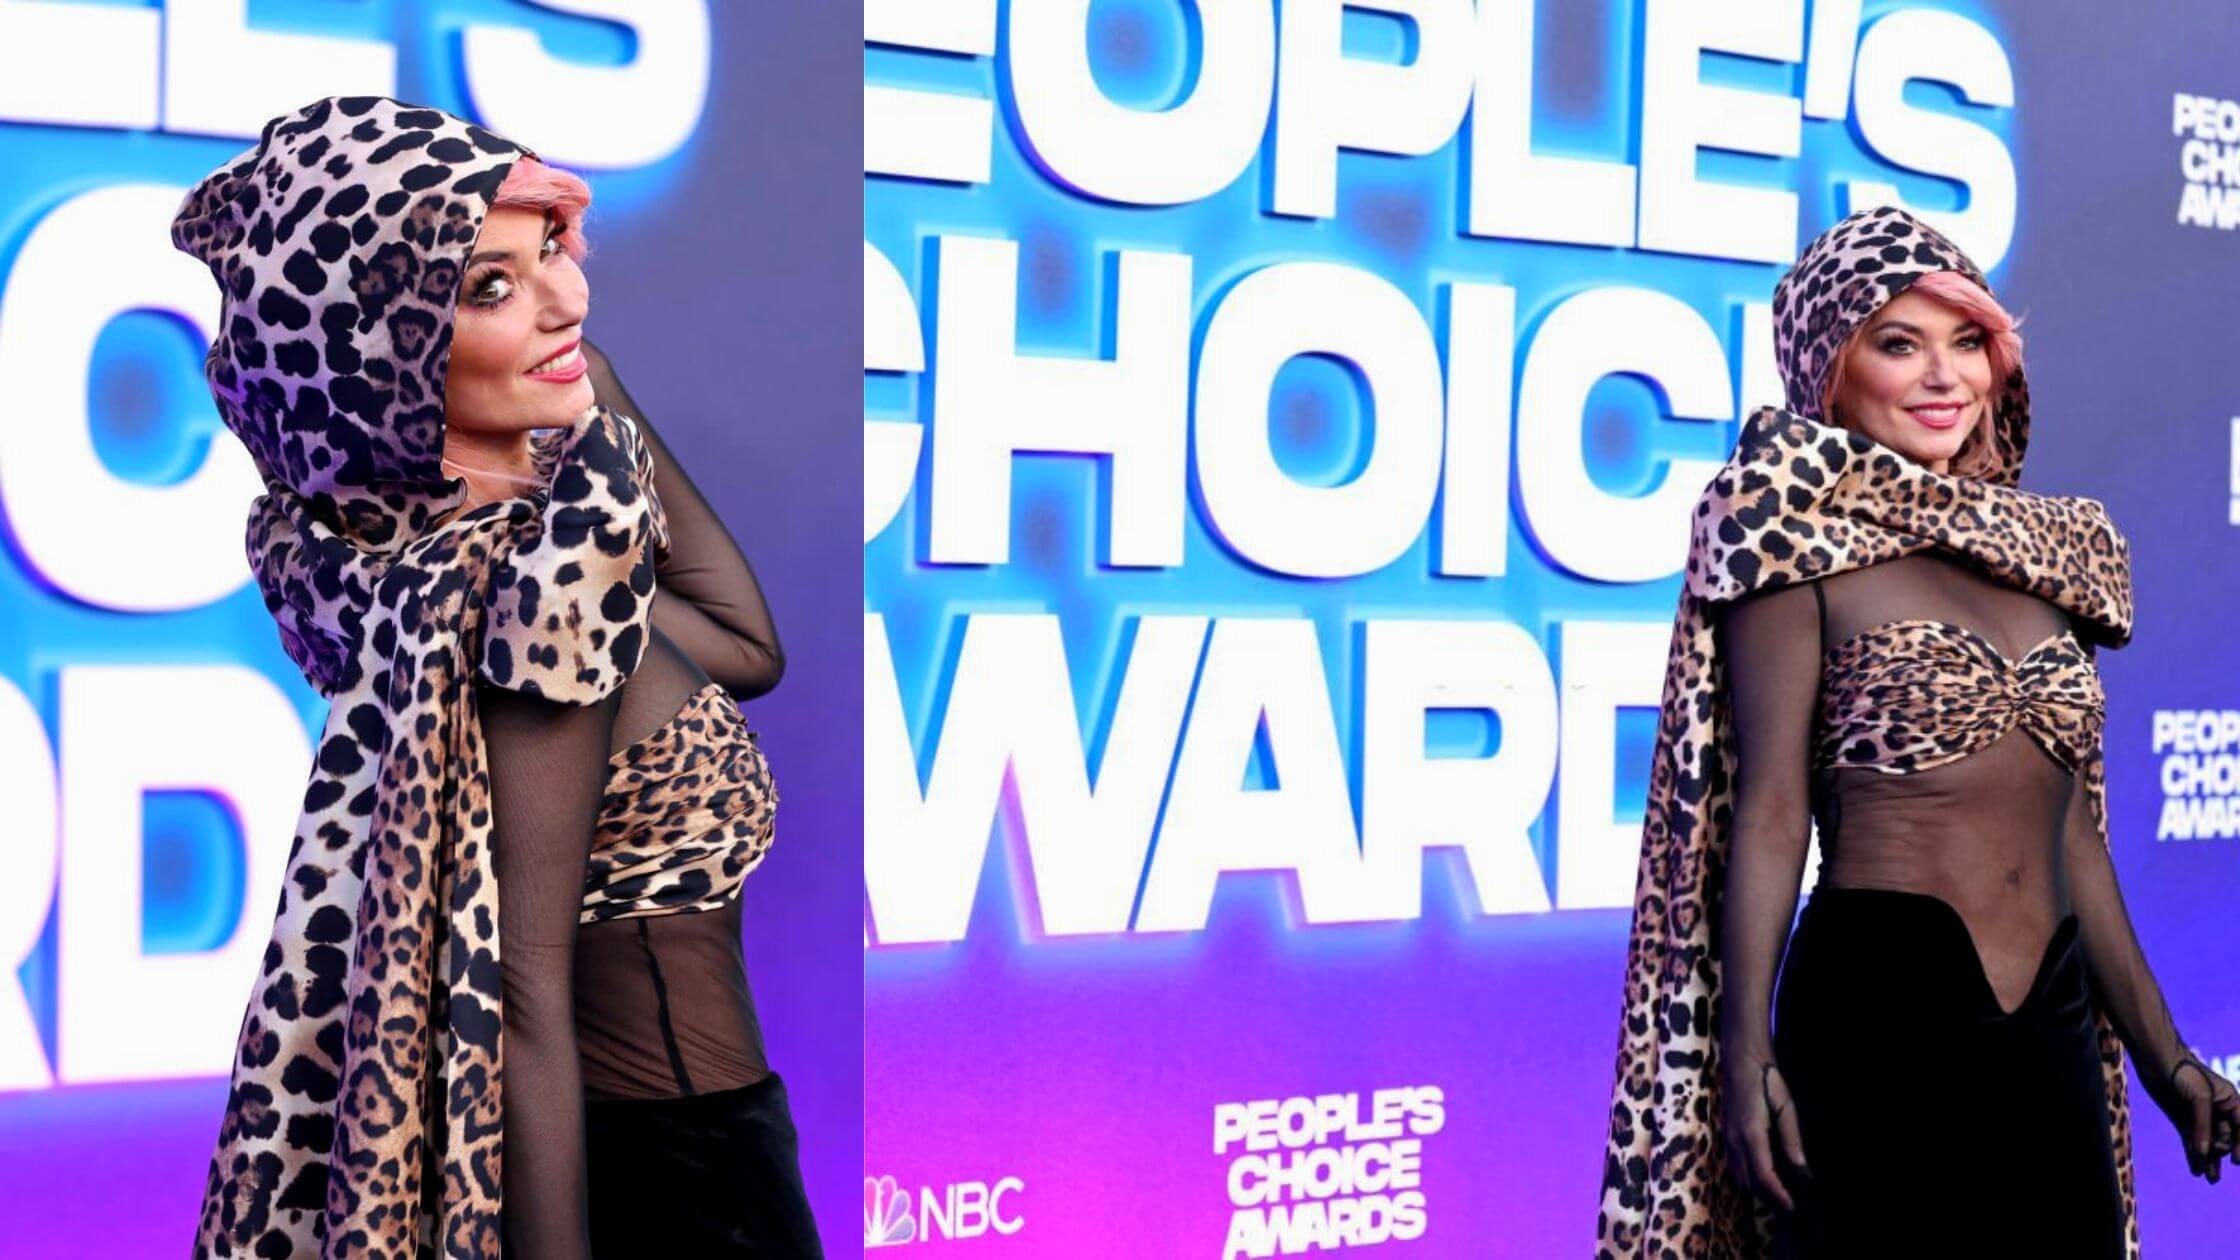 Shania Twain Creating Headlines Again She Swayed In An Iconic Look In The People's Choice Awards!